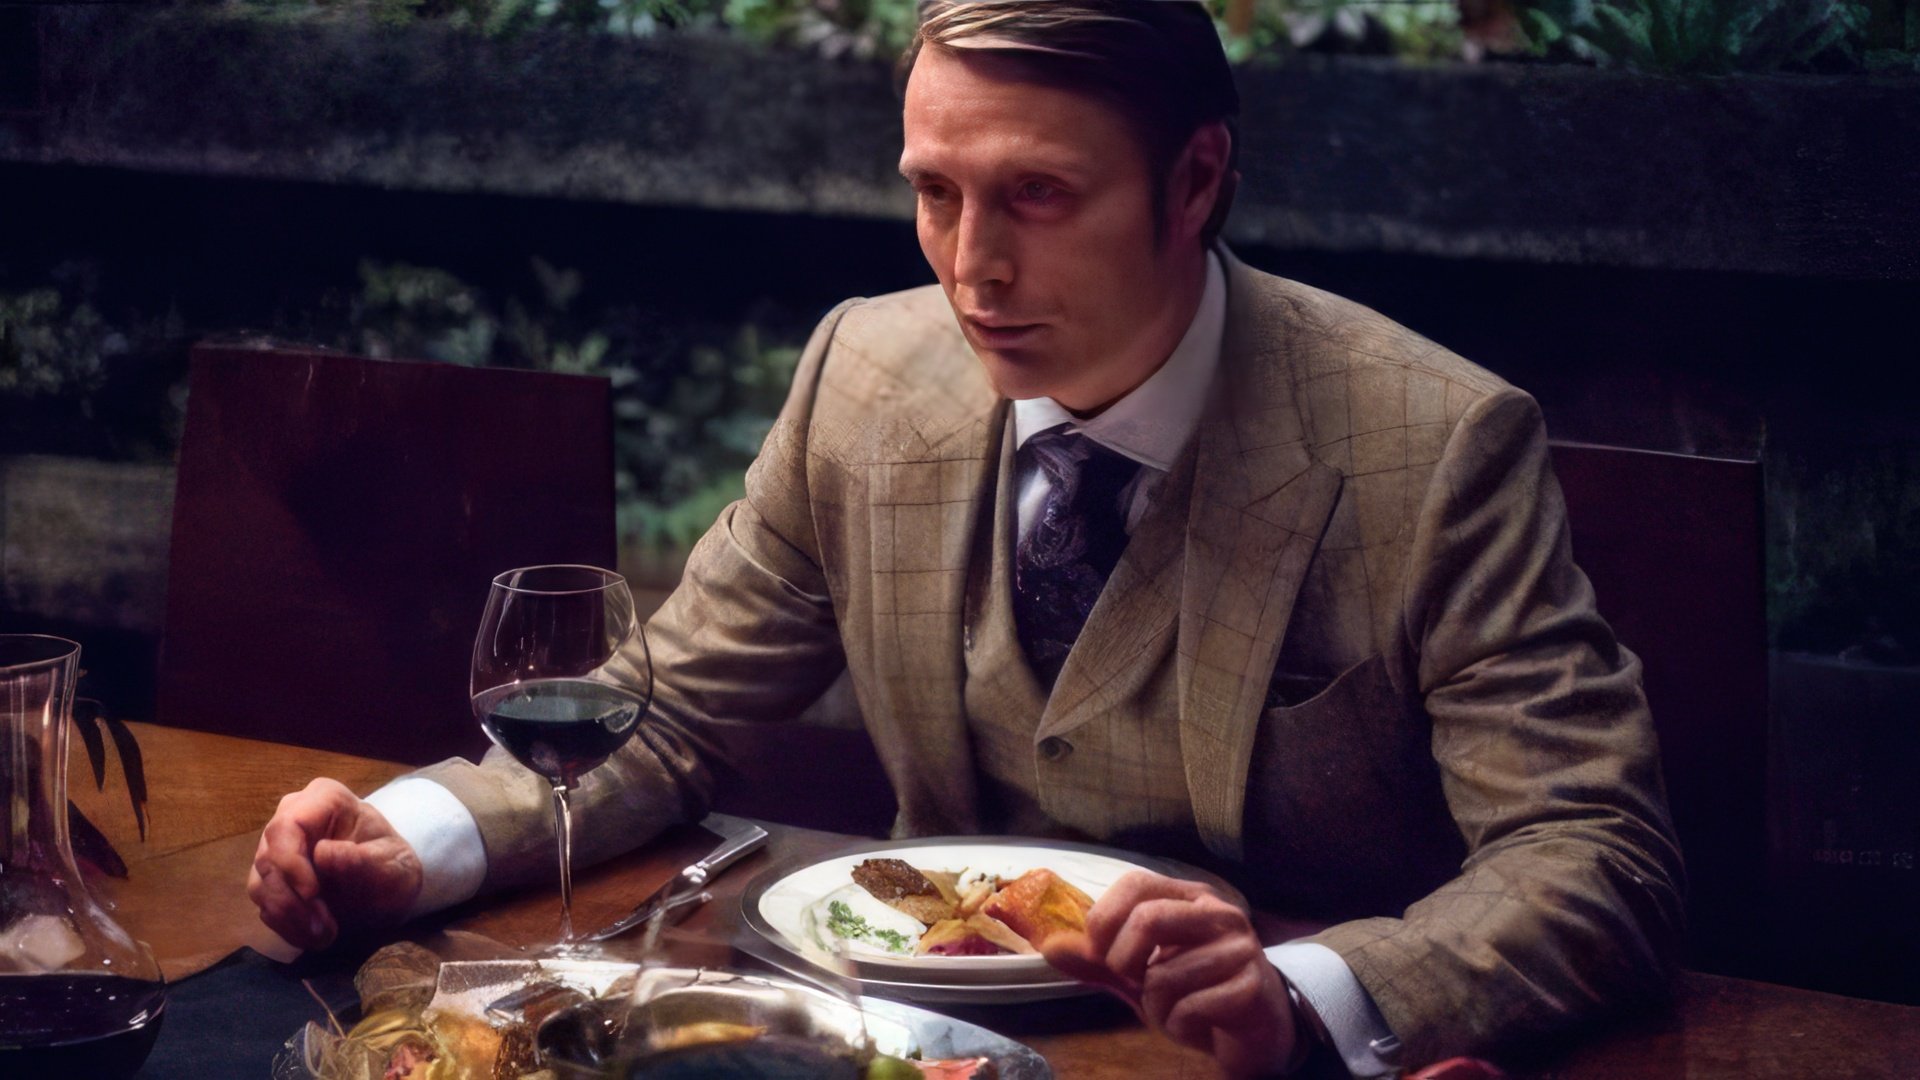 The role of Hannibal Lecter brought Mads Mikkelsen world fame